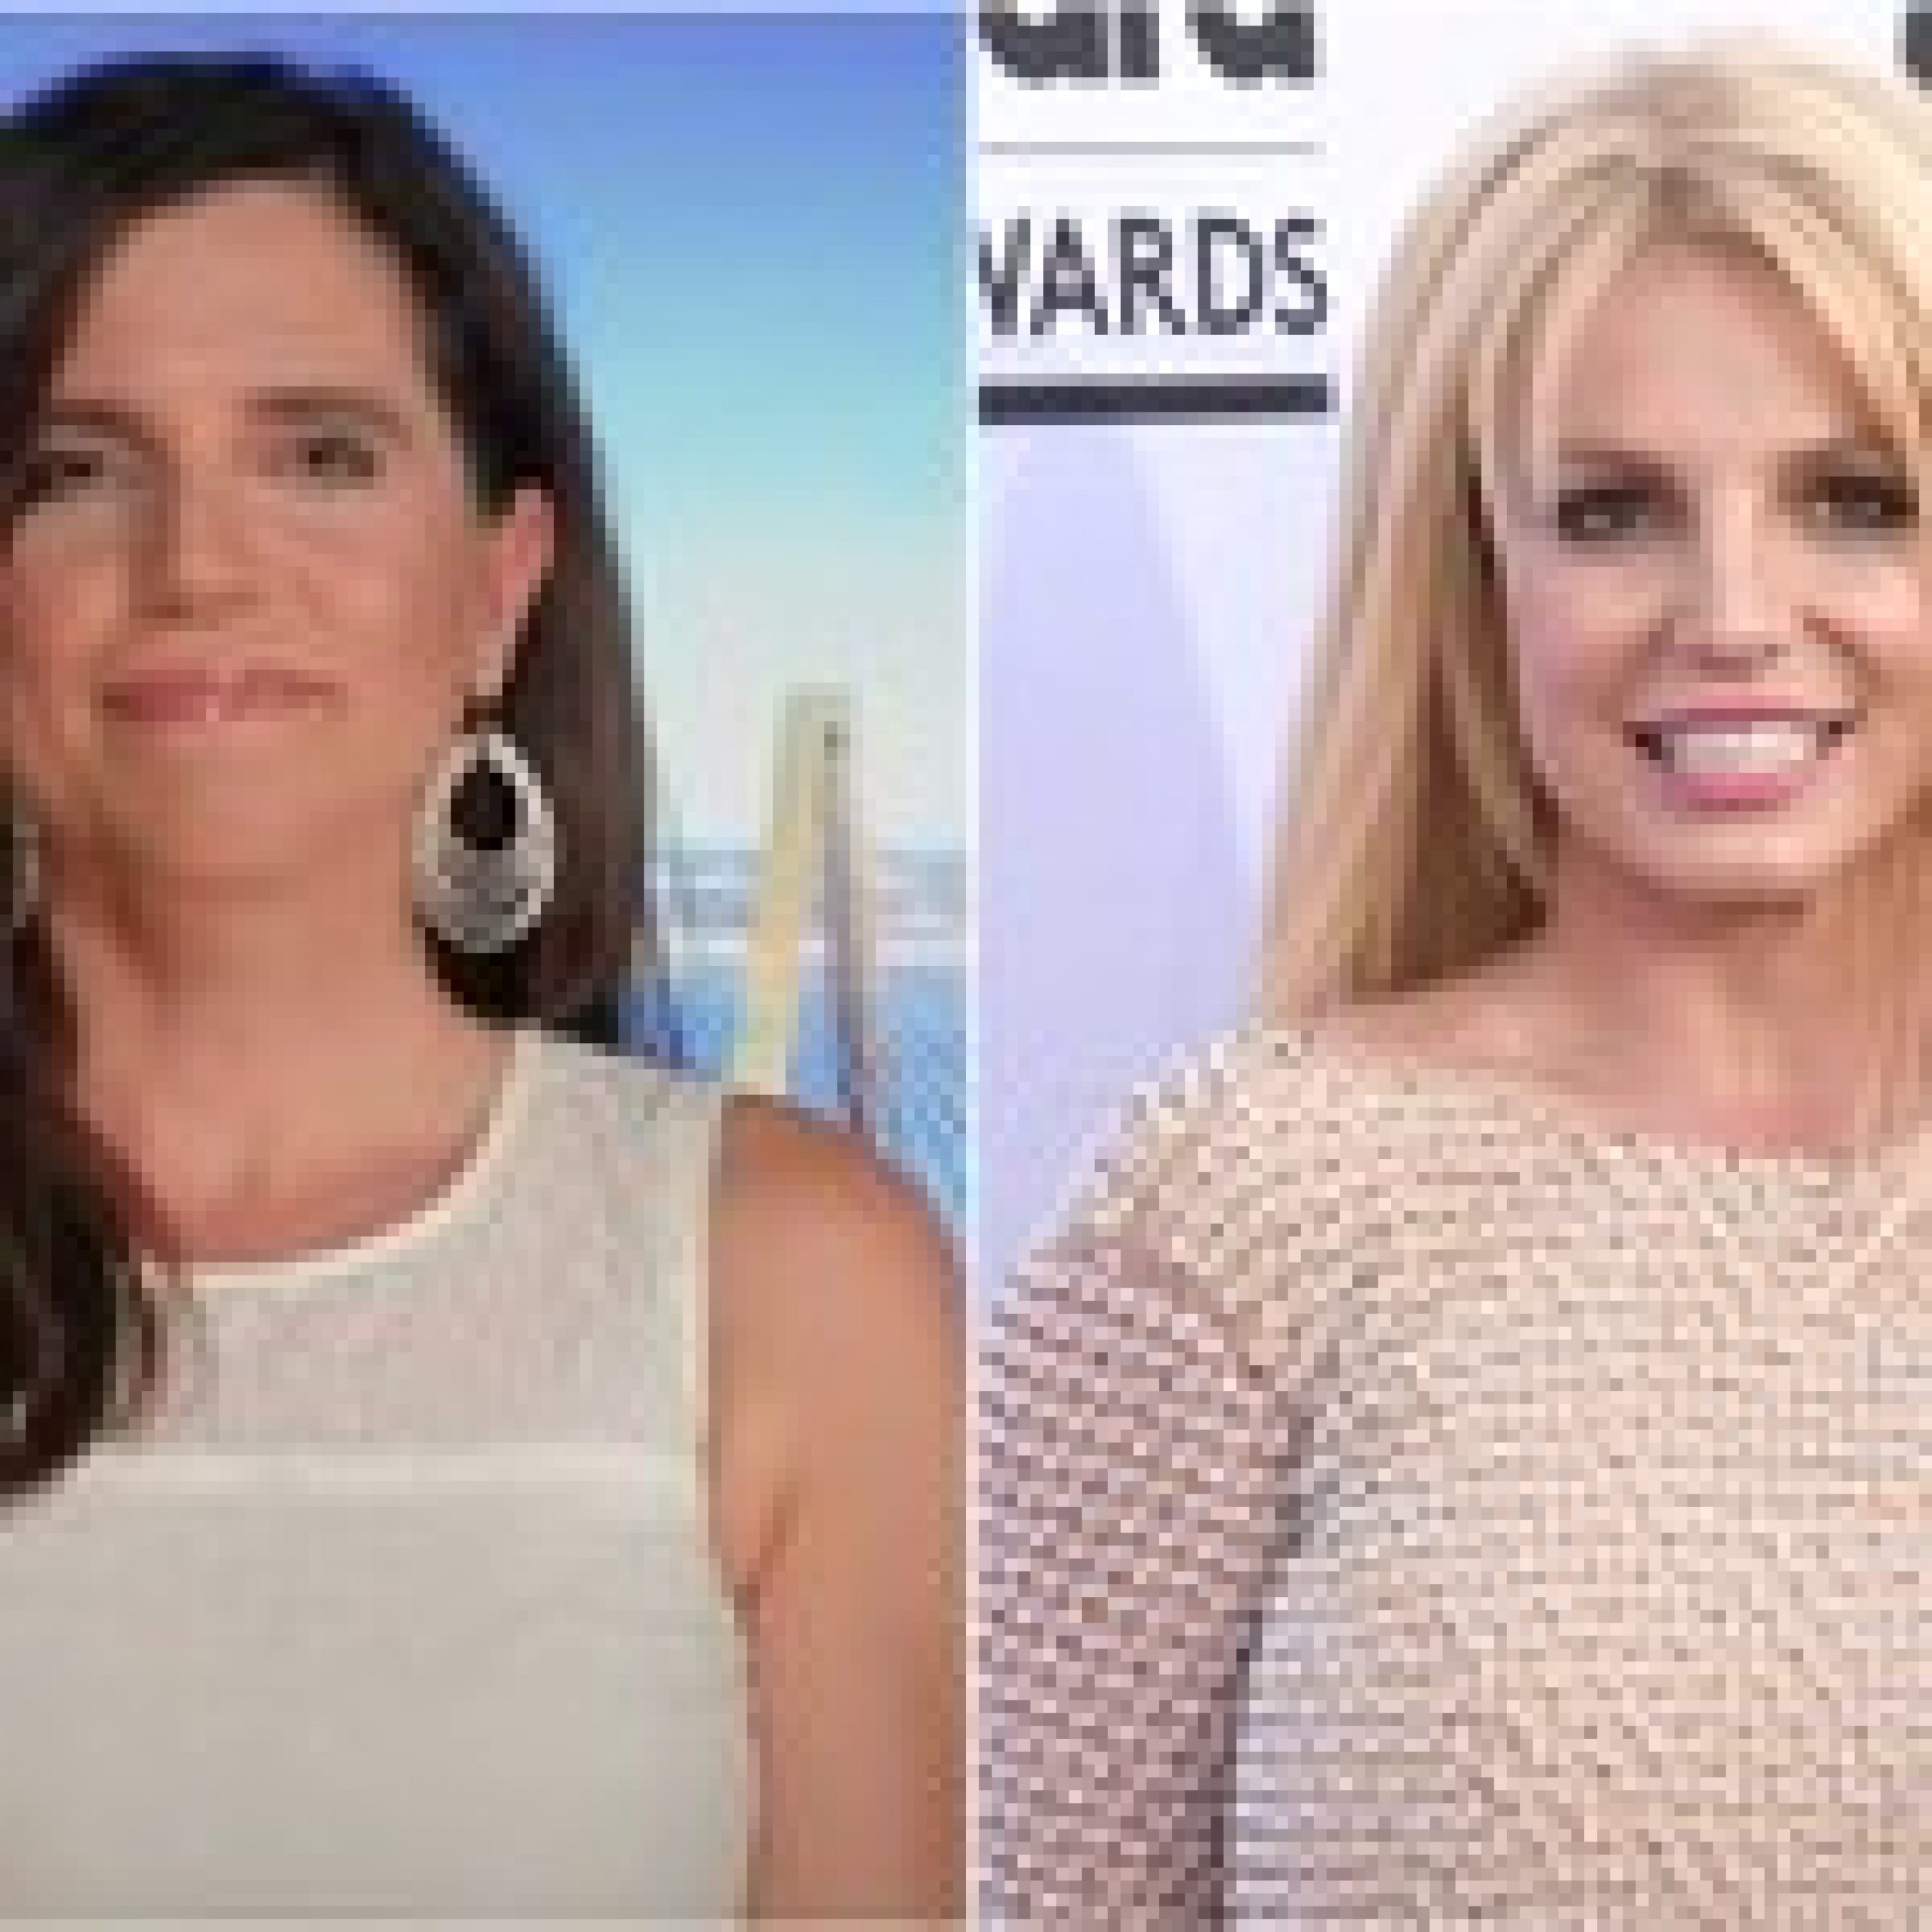 Rep. Nancy Mace Slams Britney Spears’ ‘Crazy’ Conservatorship, Compares It to ‘Communist China’